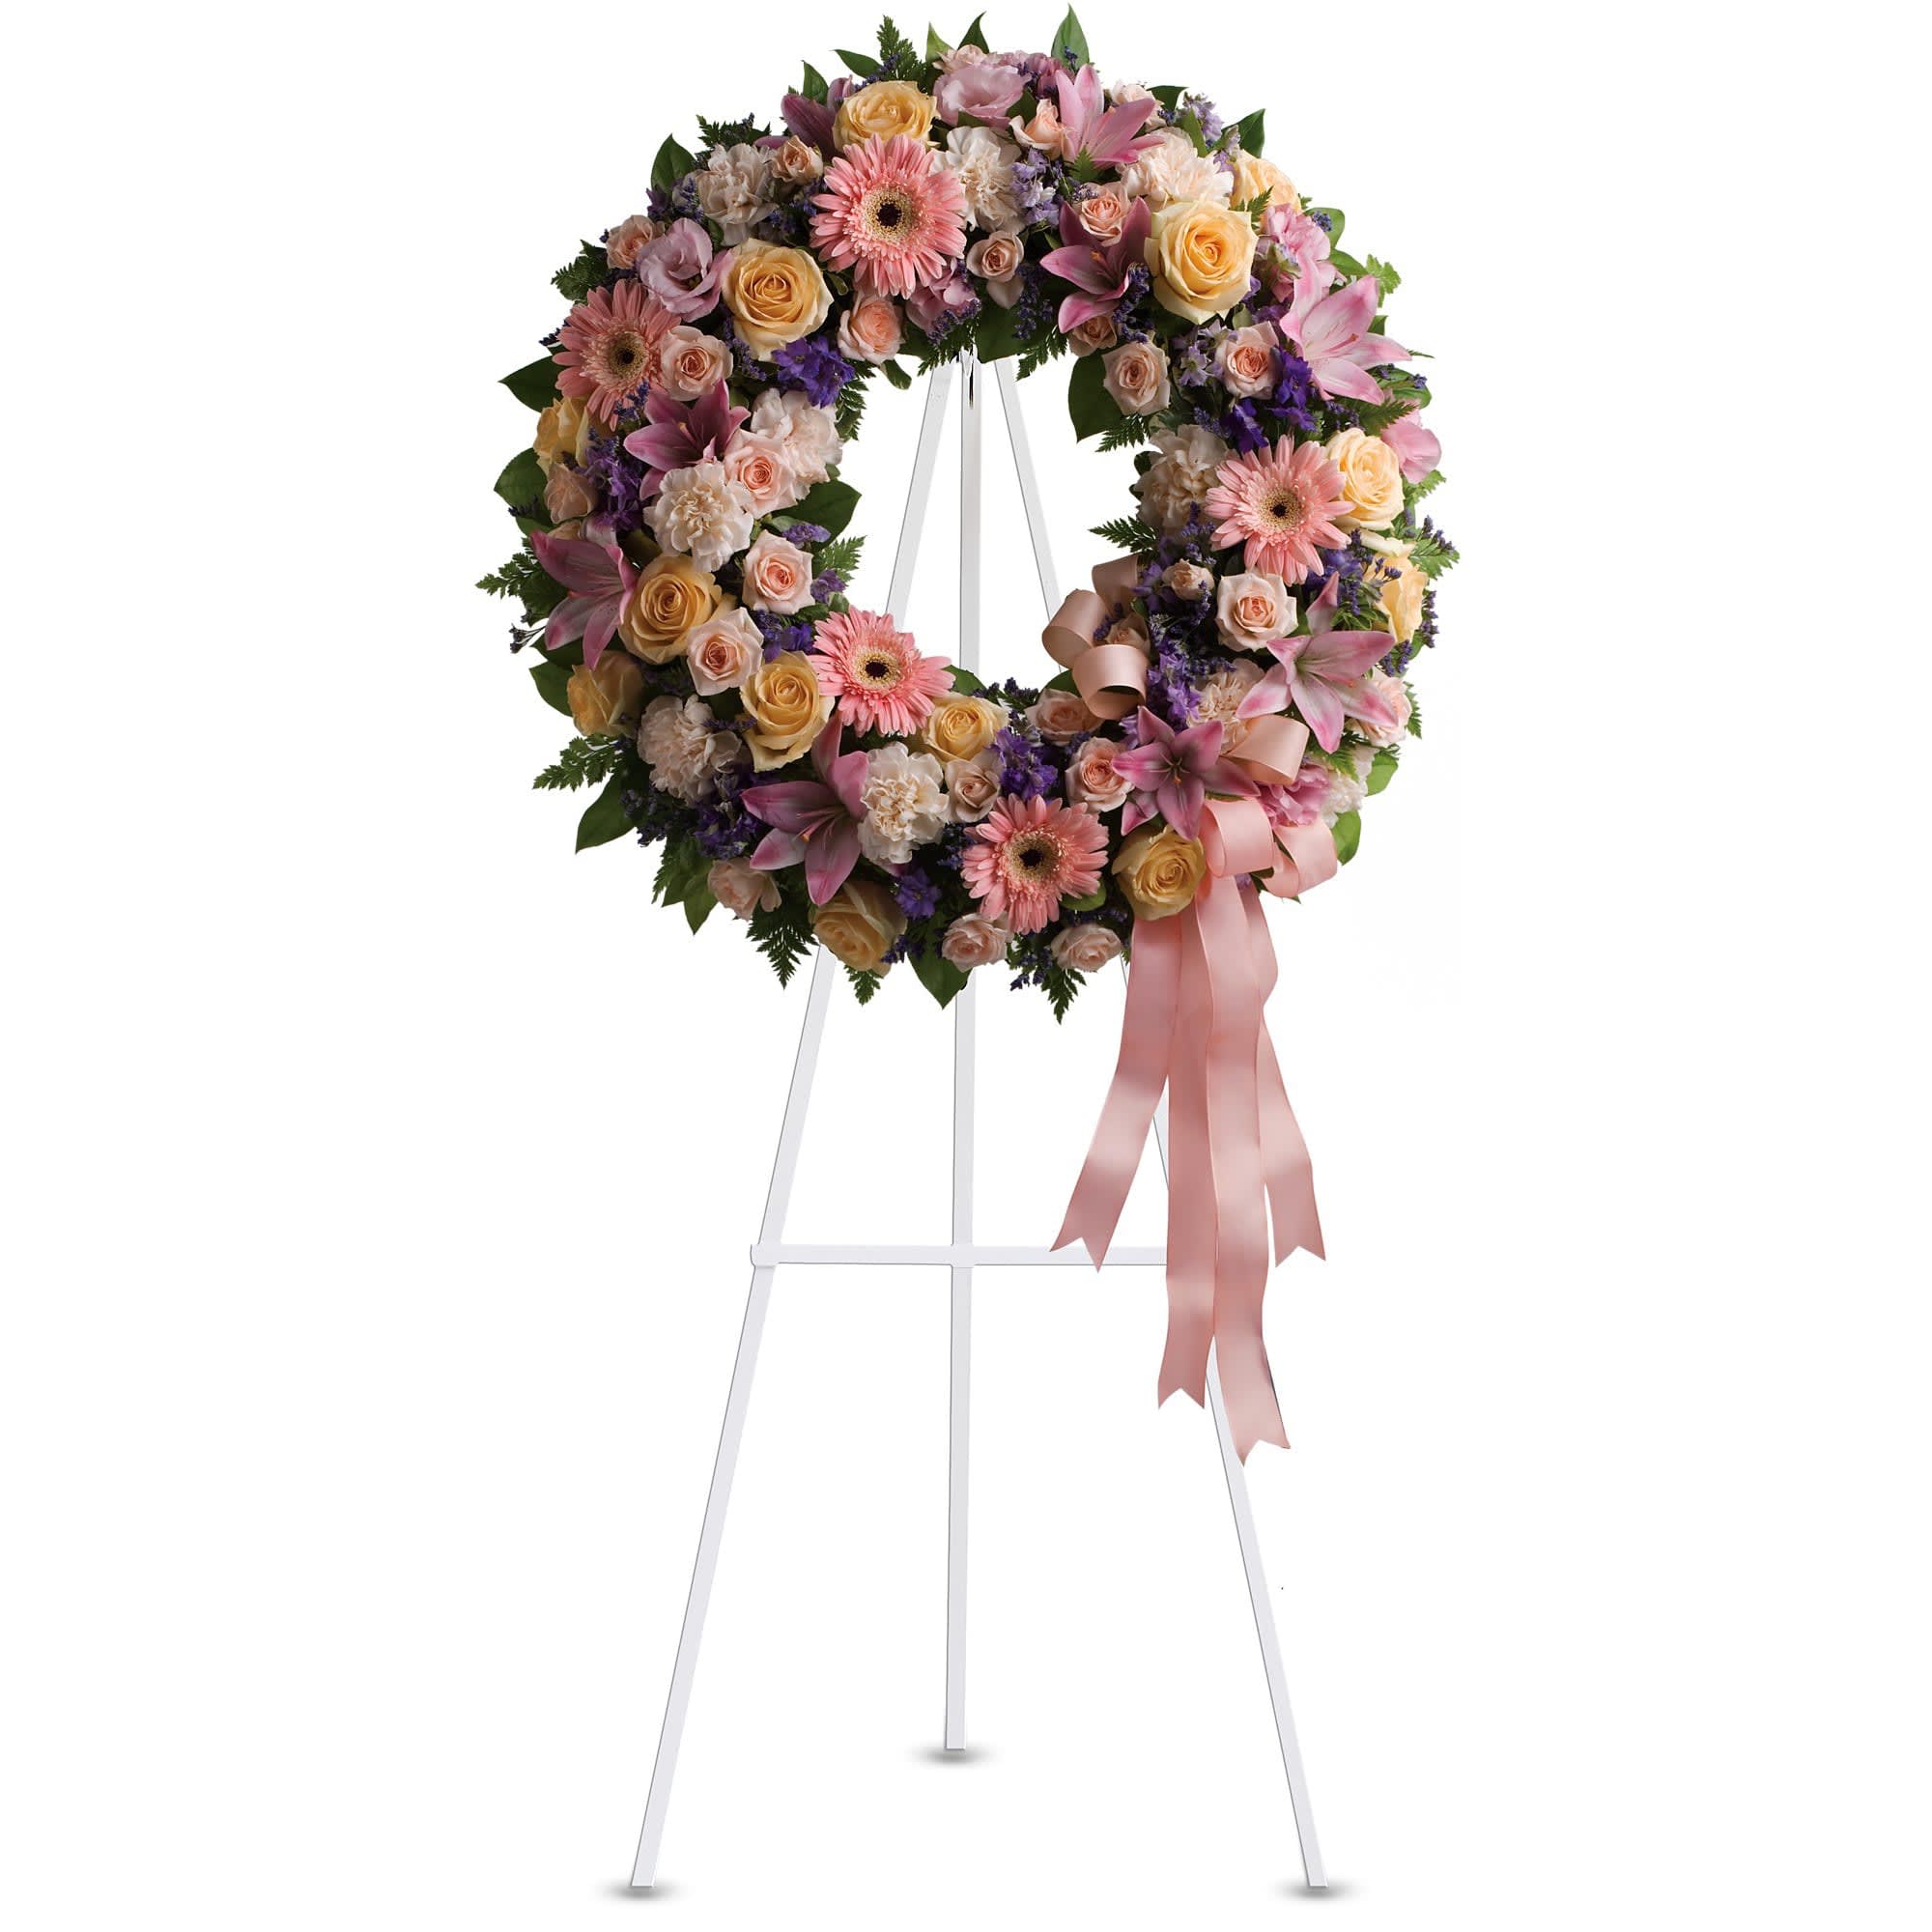 Graceful Wreath by Didi's  - Family and friends will recollect how special their loved one was with this gentle and timeless circle of fragrant blooms to celebrate sweet memories. 